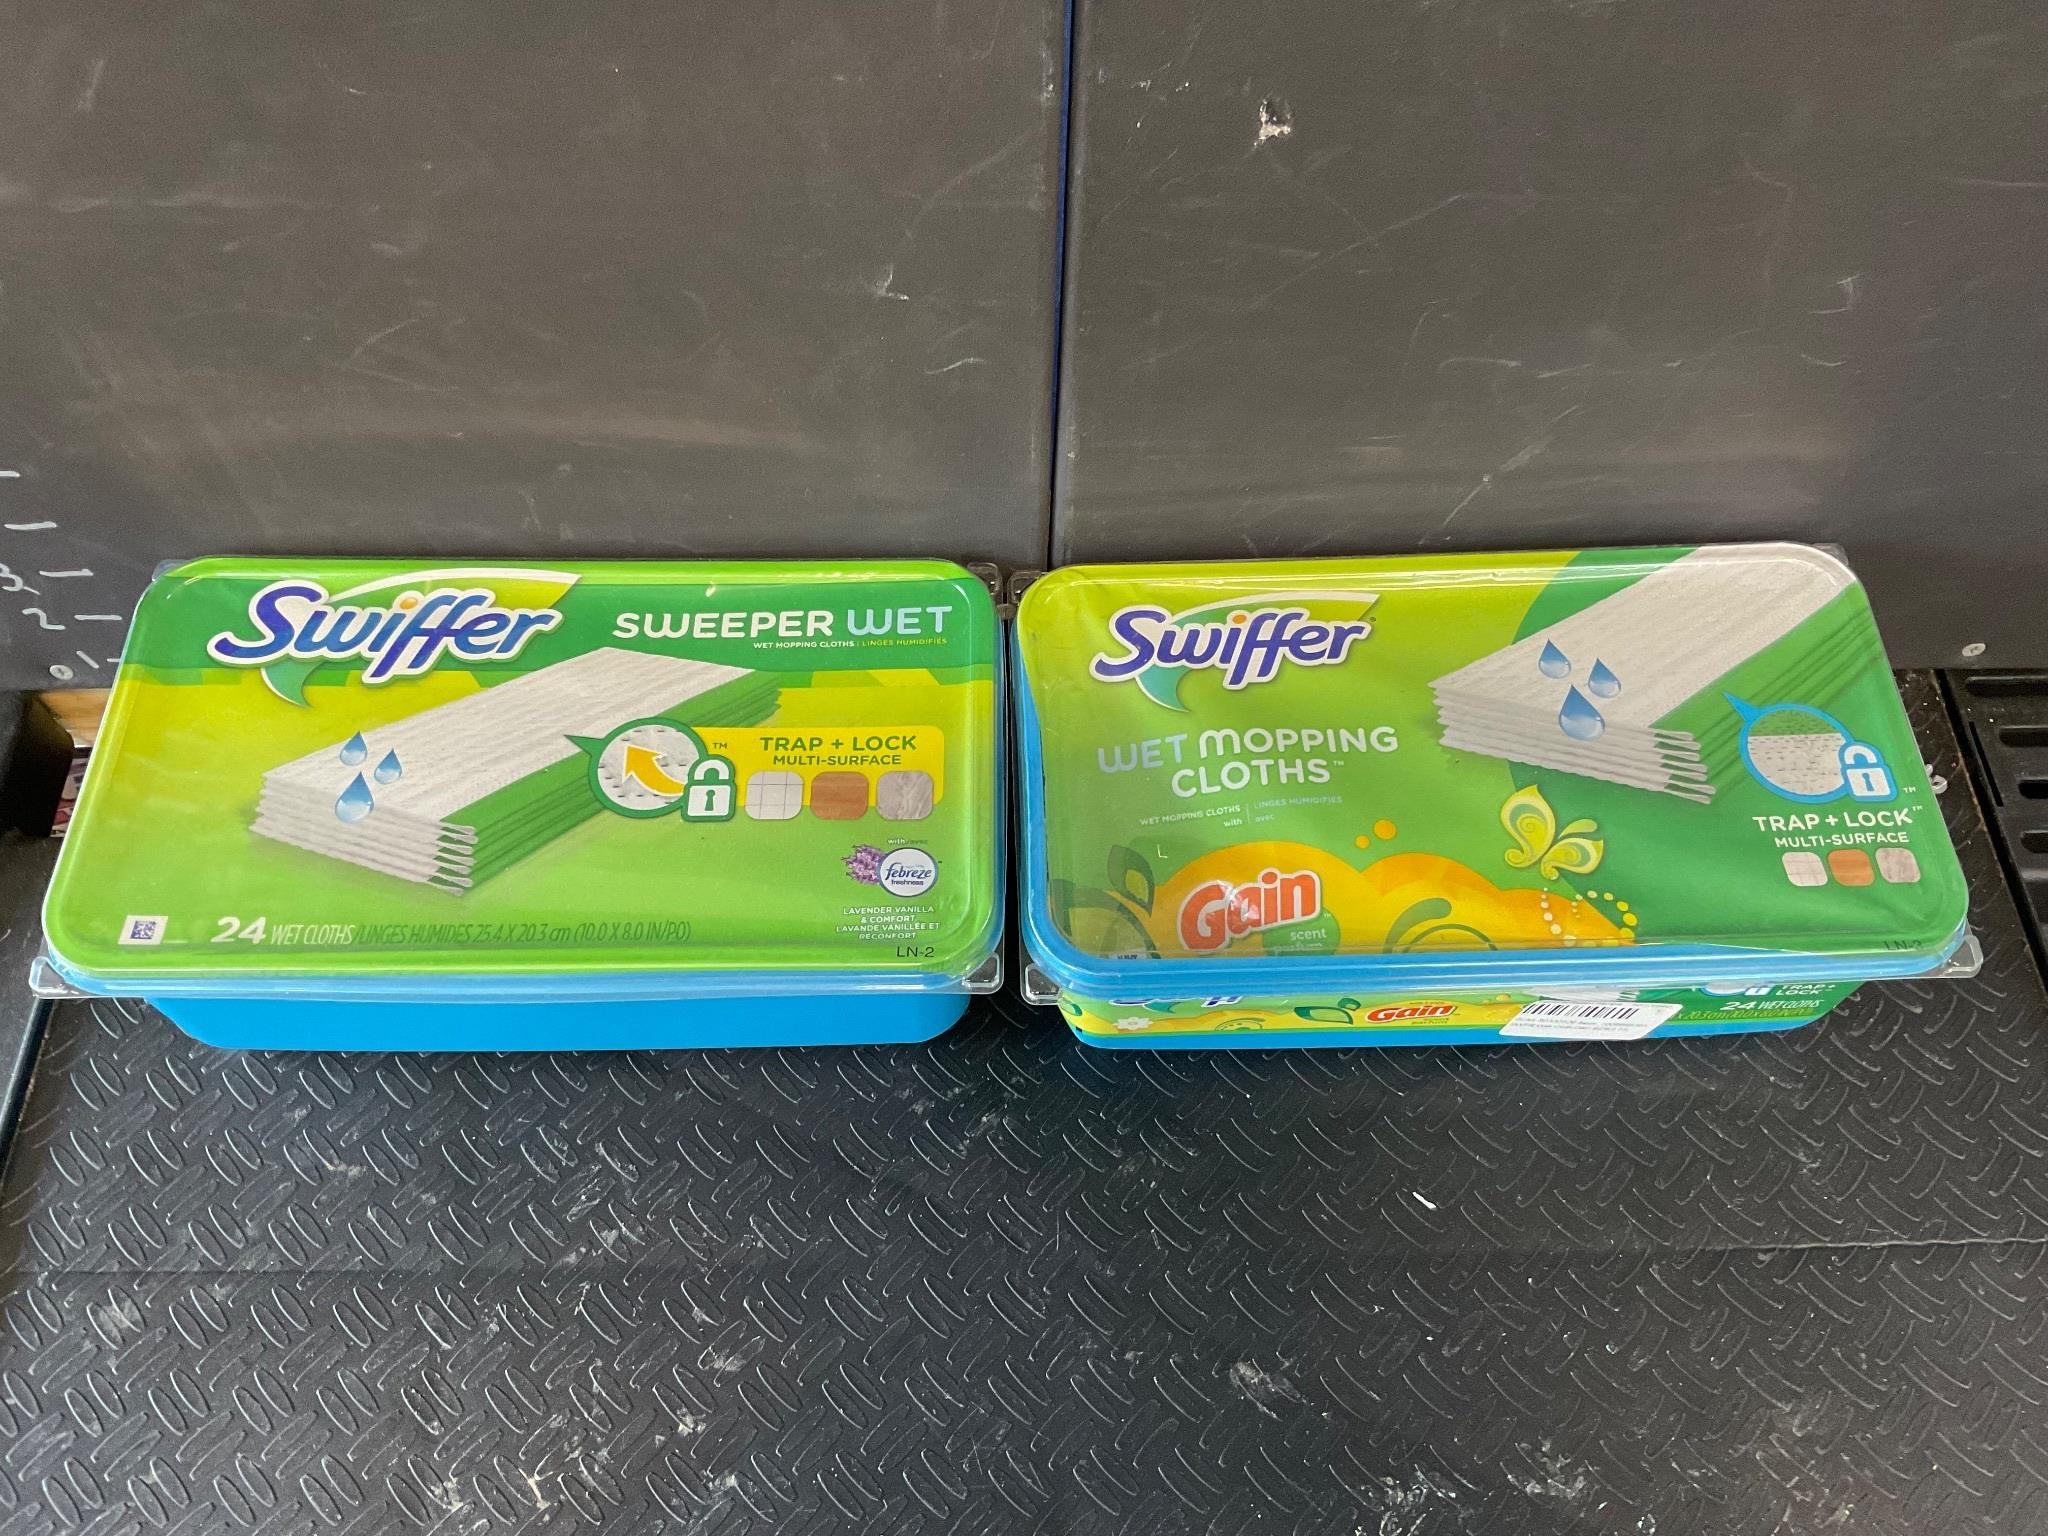 Two packs of swiffer wet mopping cloths opened